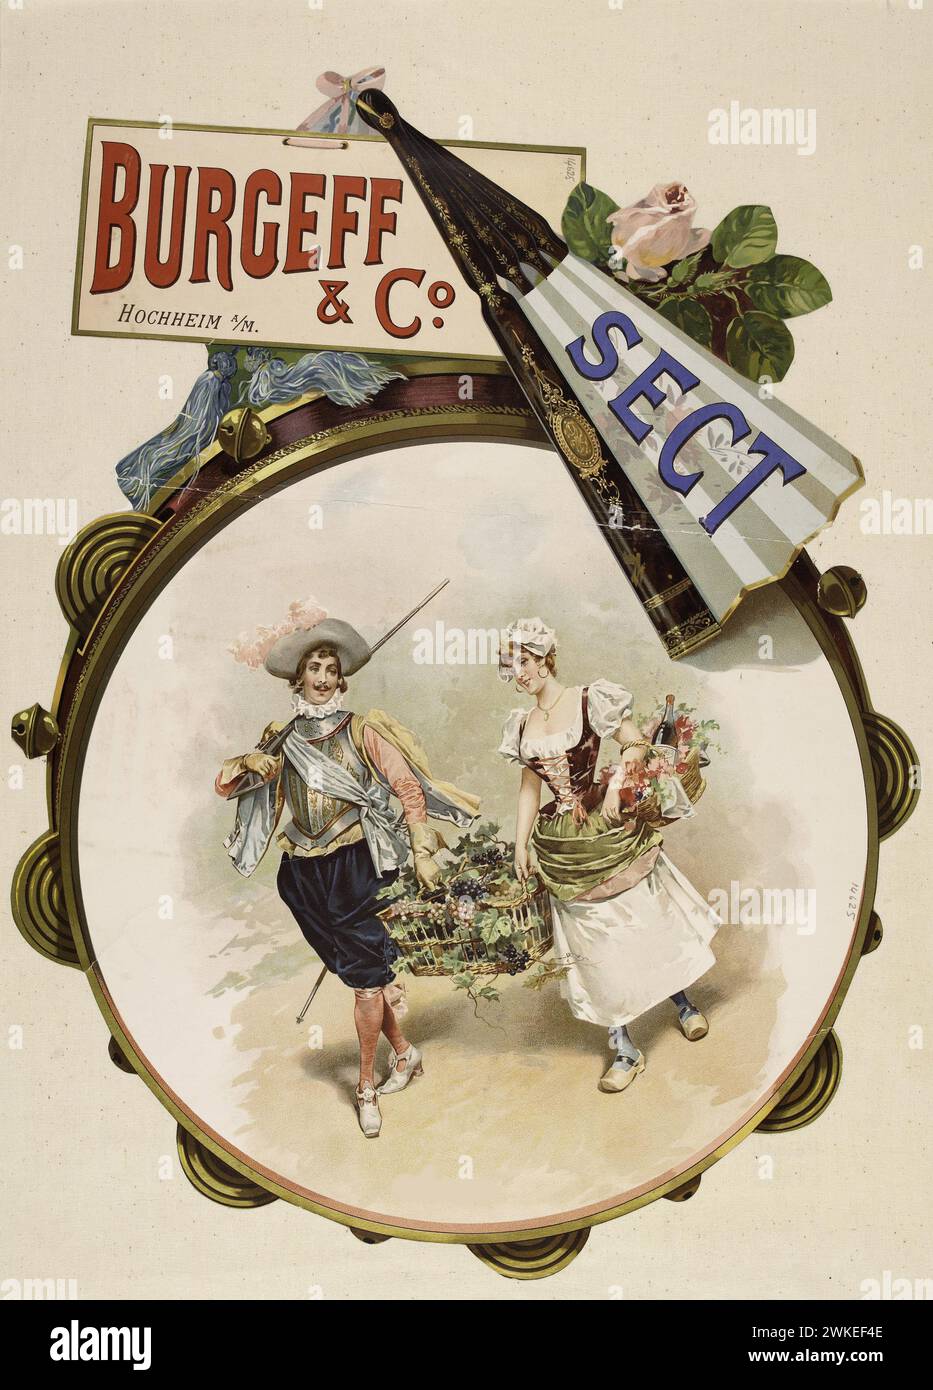 Burgeff & Co. Sparkling wine, Hochheim am Main. Museum: PRIVATE COLLECTION. Author: ANONYMOUS. Stock Photo